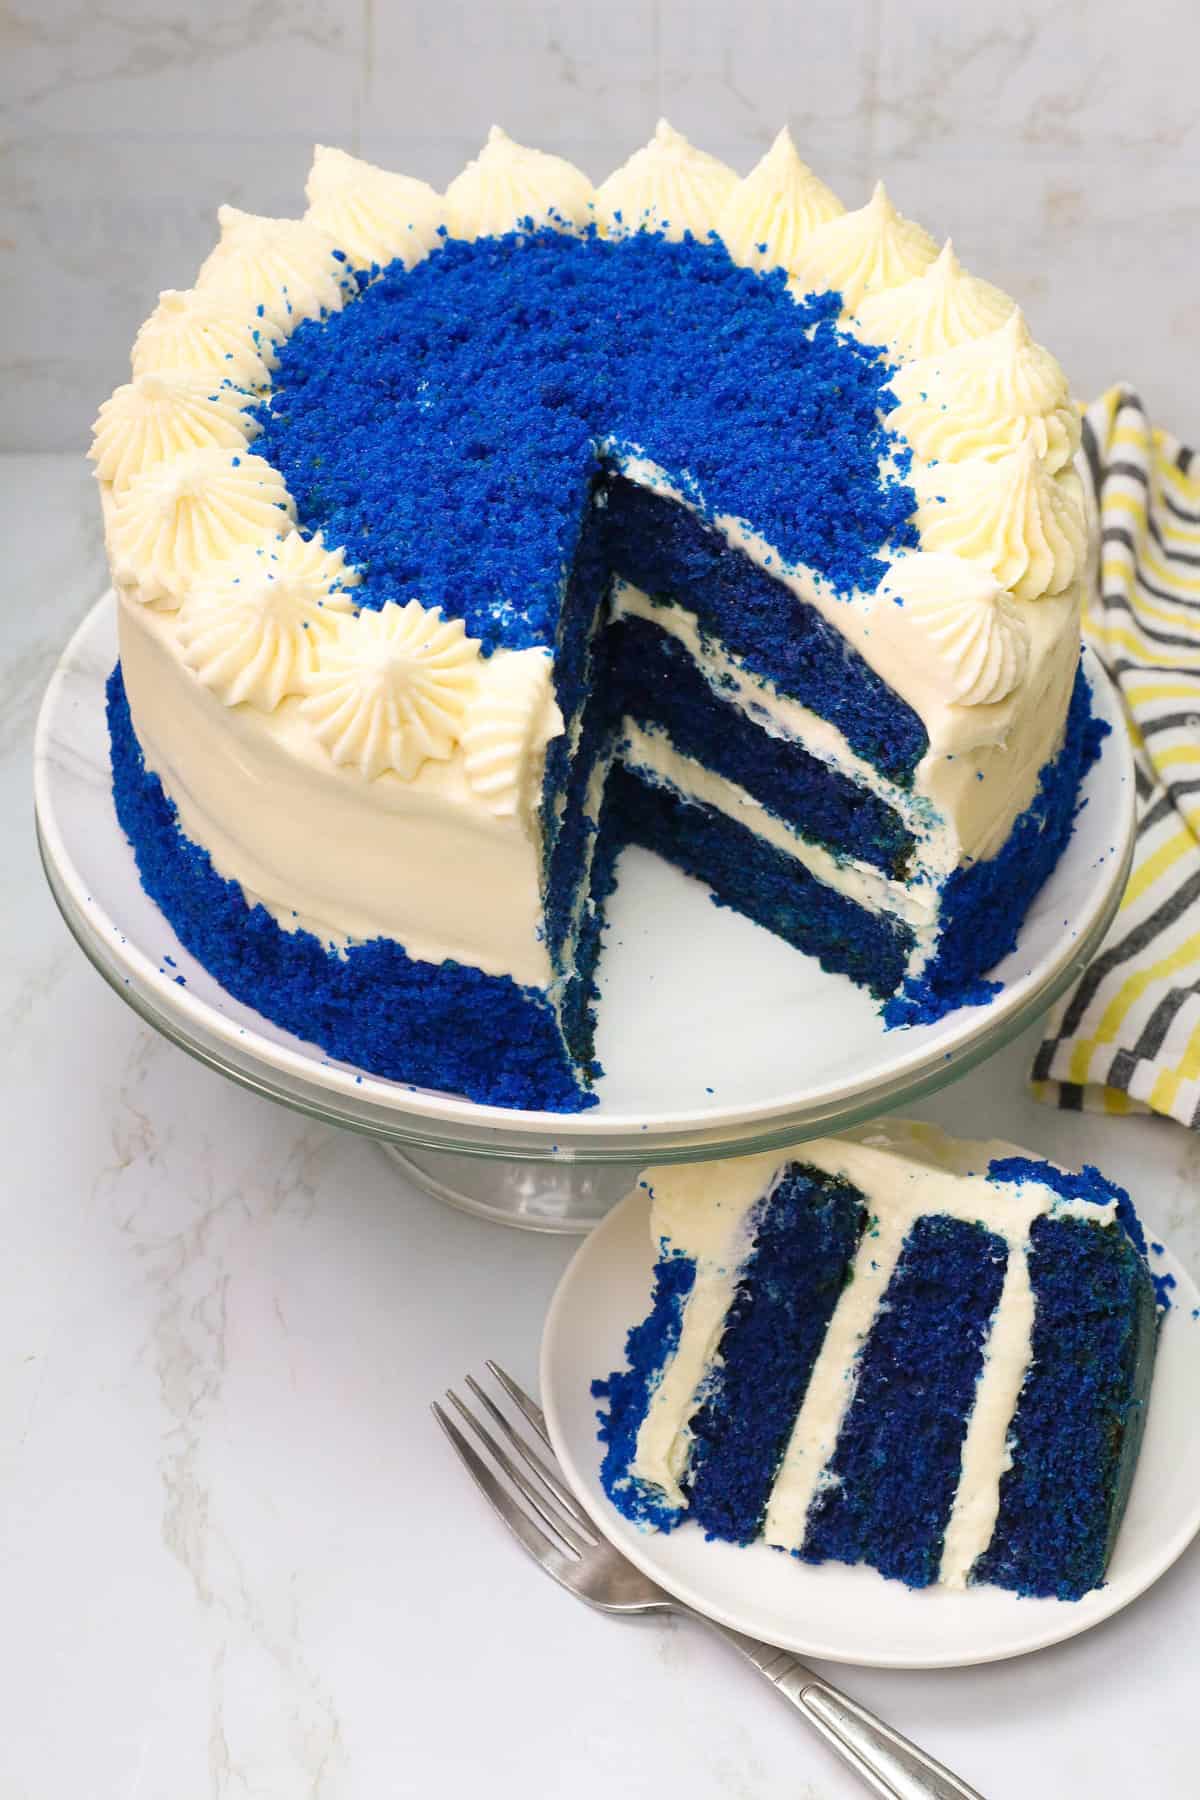 Slicing up an insanely delicious blue velvet cake